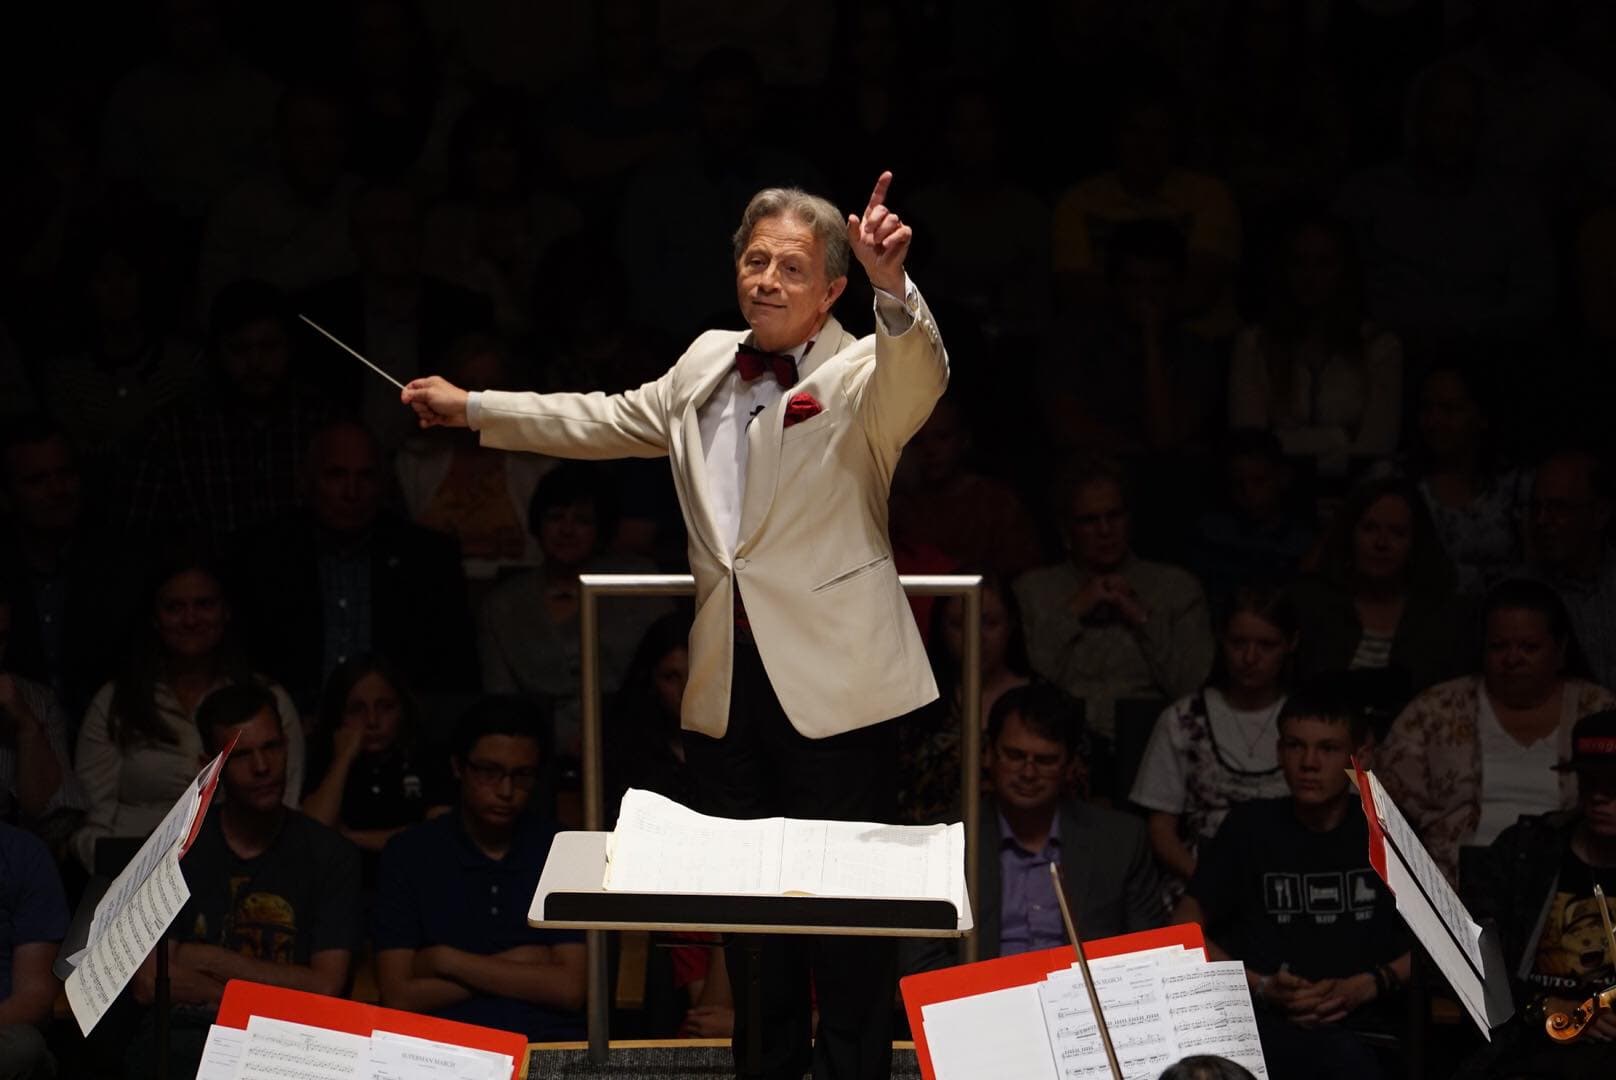 Conductor in white jacket conducting an orchestra